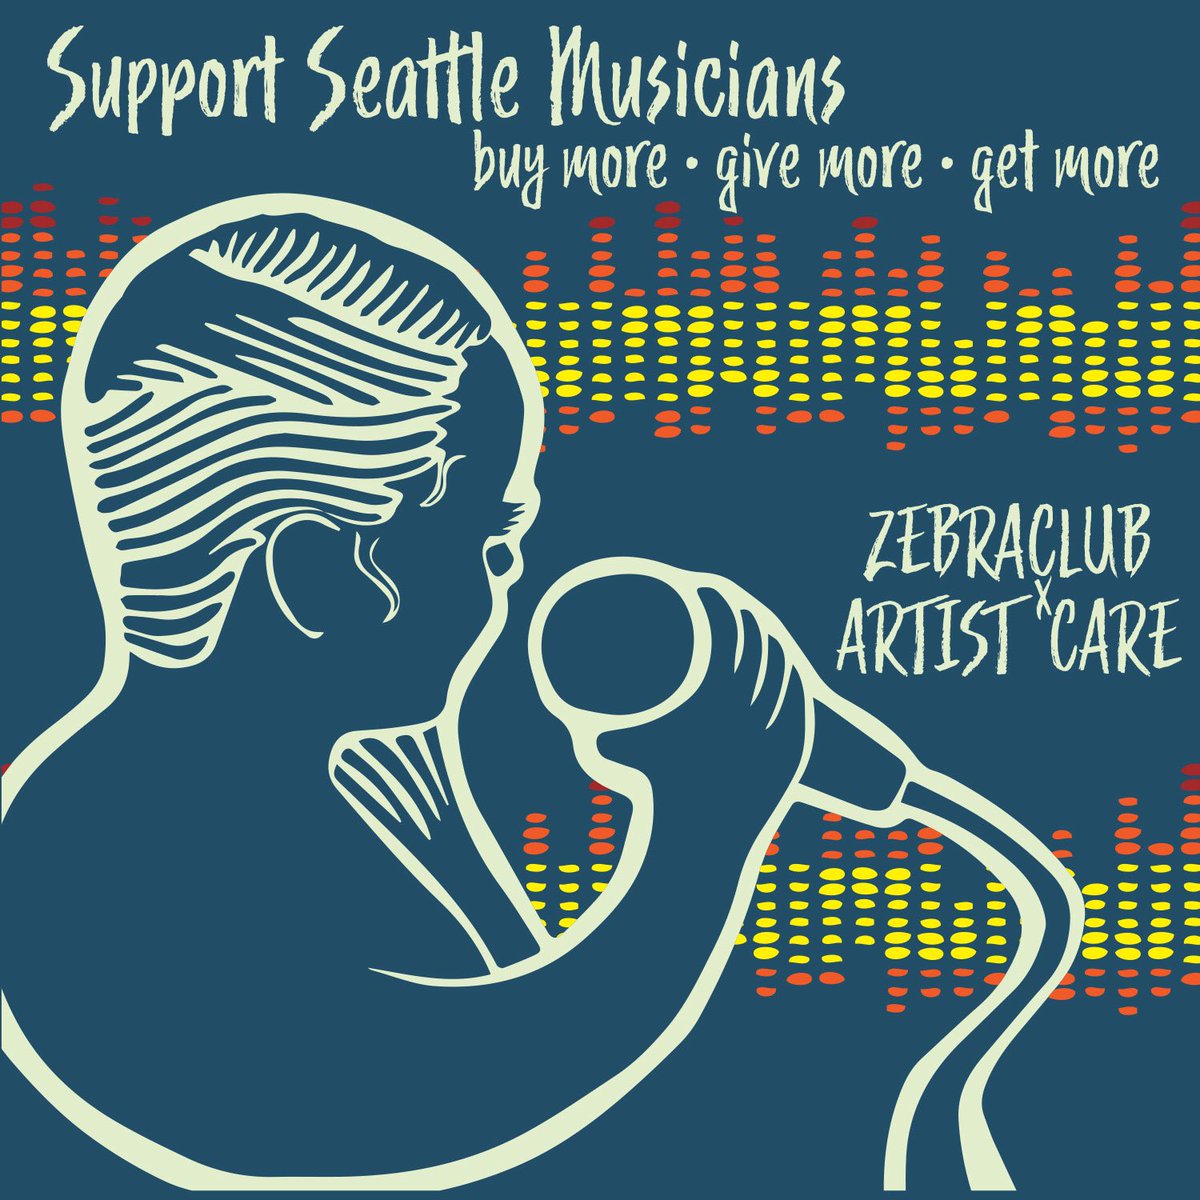 Not a musician and still want to support this beautiful, vibrant community by way of SMASH? Say less Seattle clothing shop  @Zebraclub_Store and Artist Care Seattle are joining with  @smash_access this December to give back 